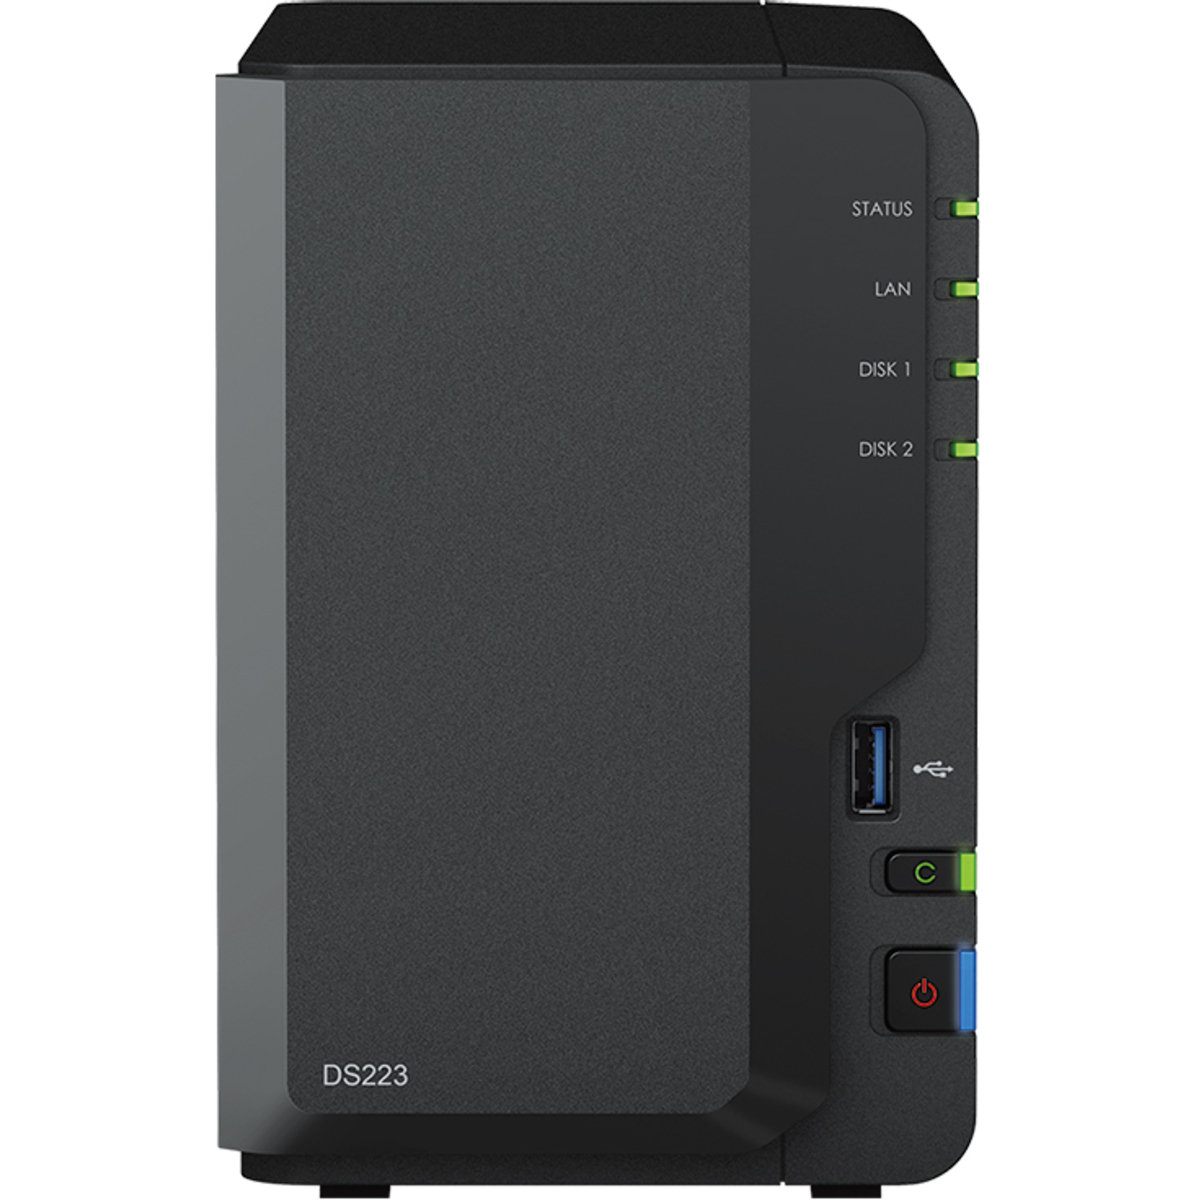 buy Synology DiskStation DS223 Desktop NAS - Network Attached Storage Device Burn-In Tested Configurations - nas headquarters buy network attached storage server device das new raid-5 free shipping usa DiskStation DS223